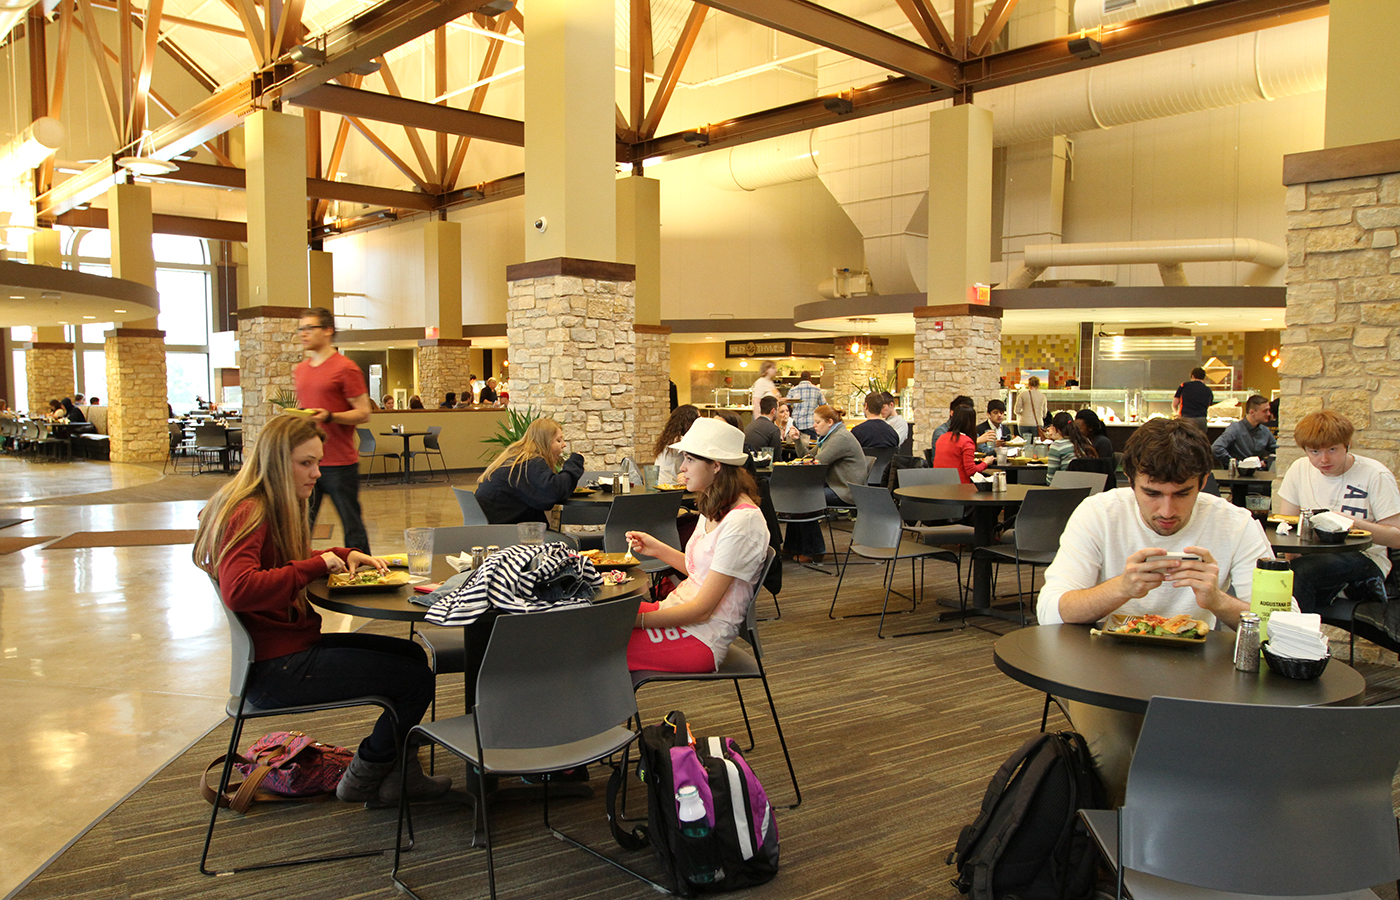 Dining in The Gerber Center